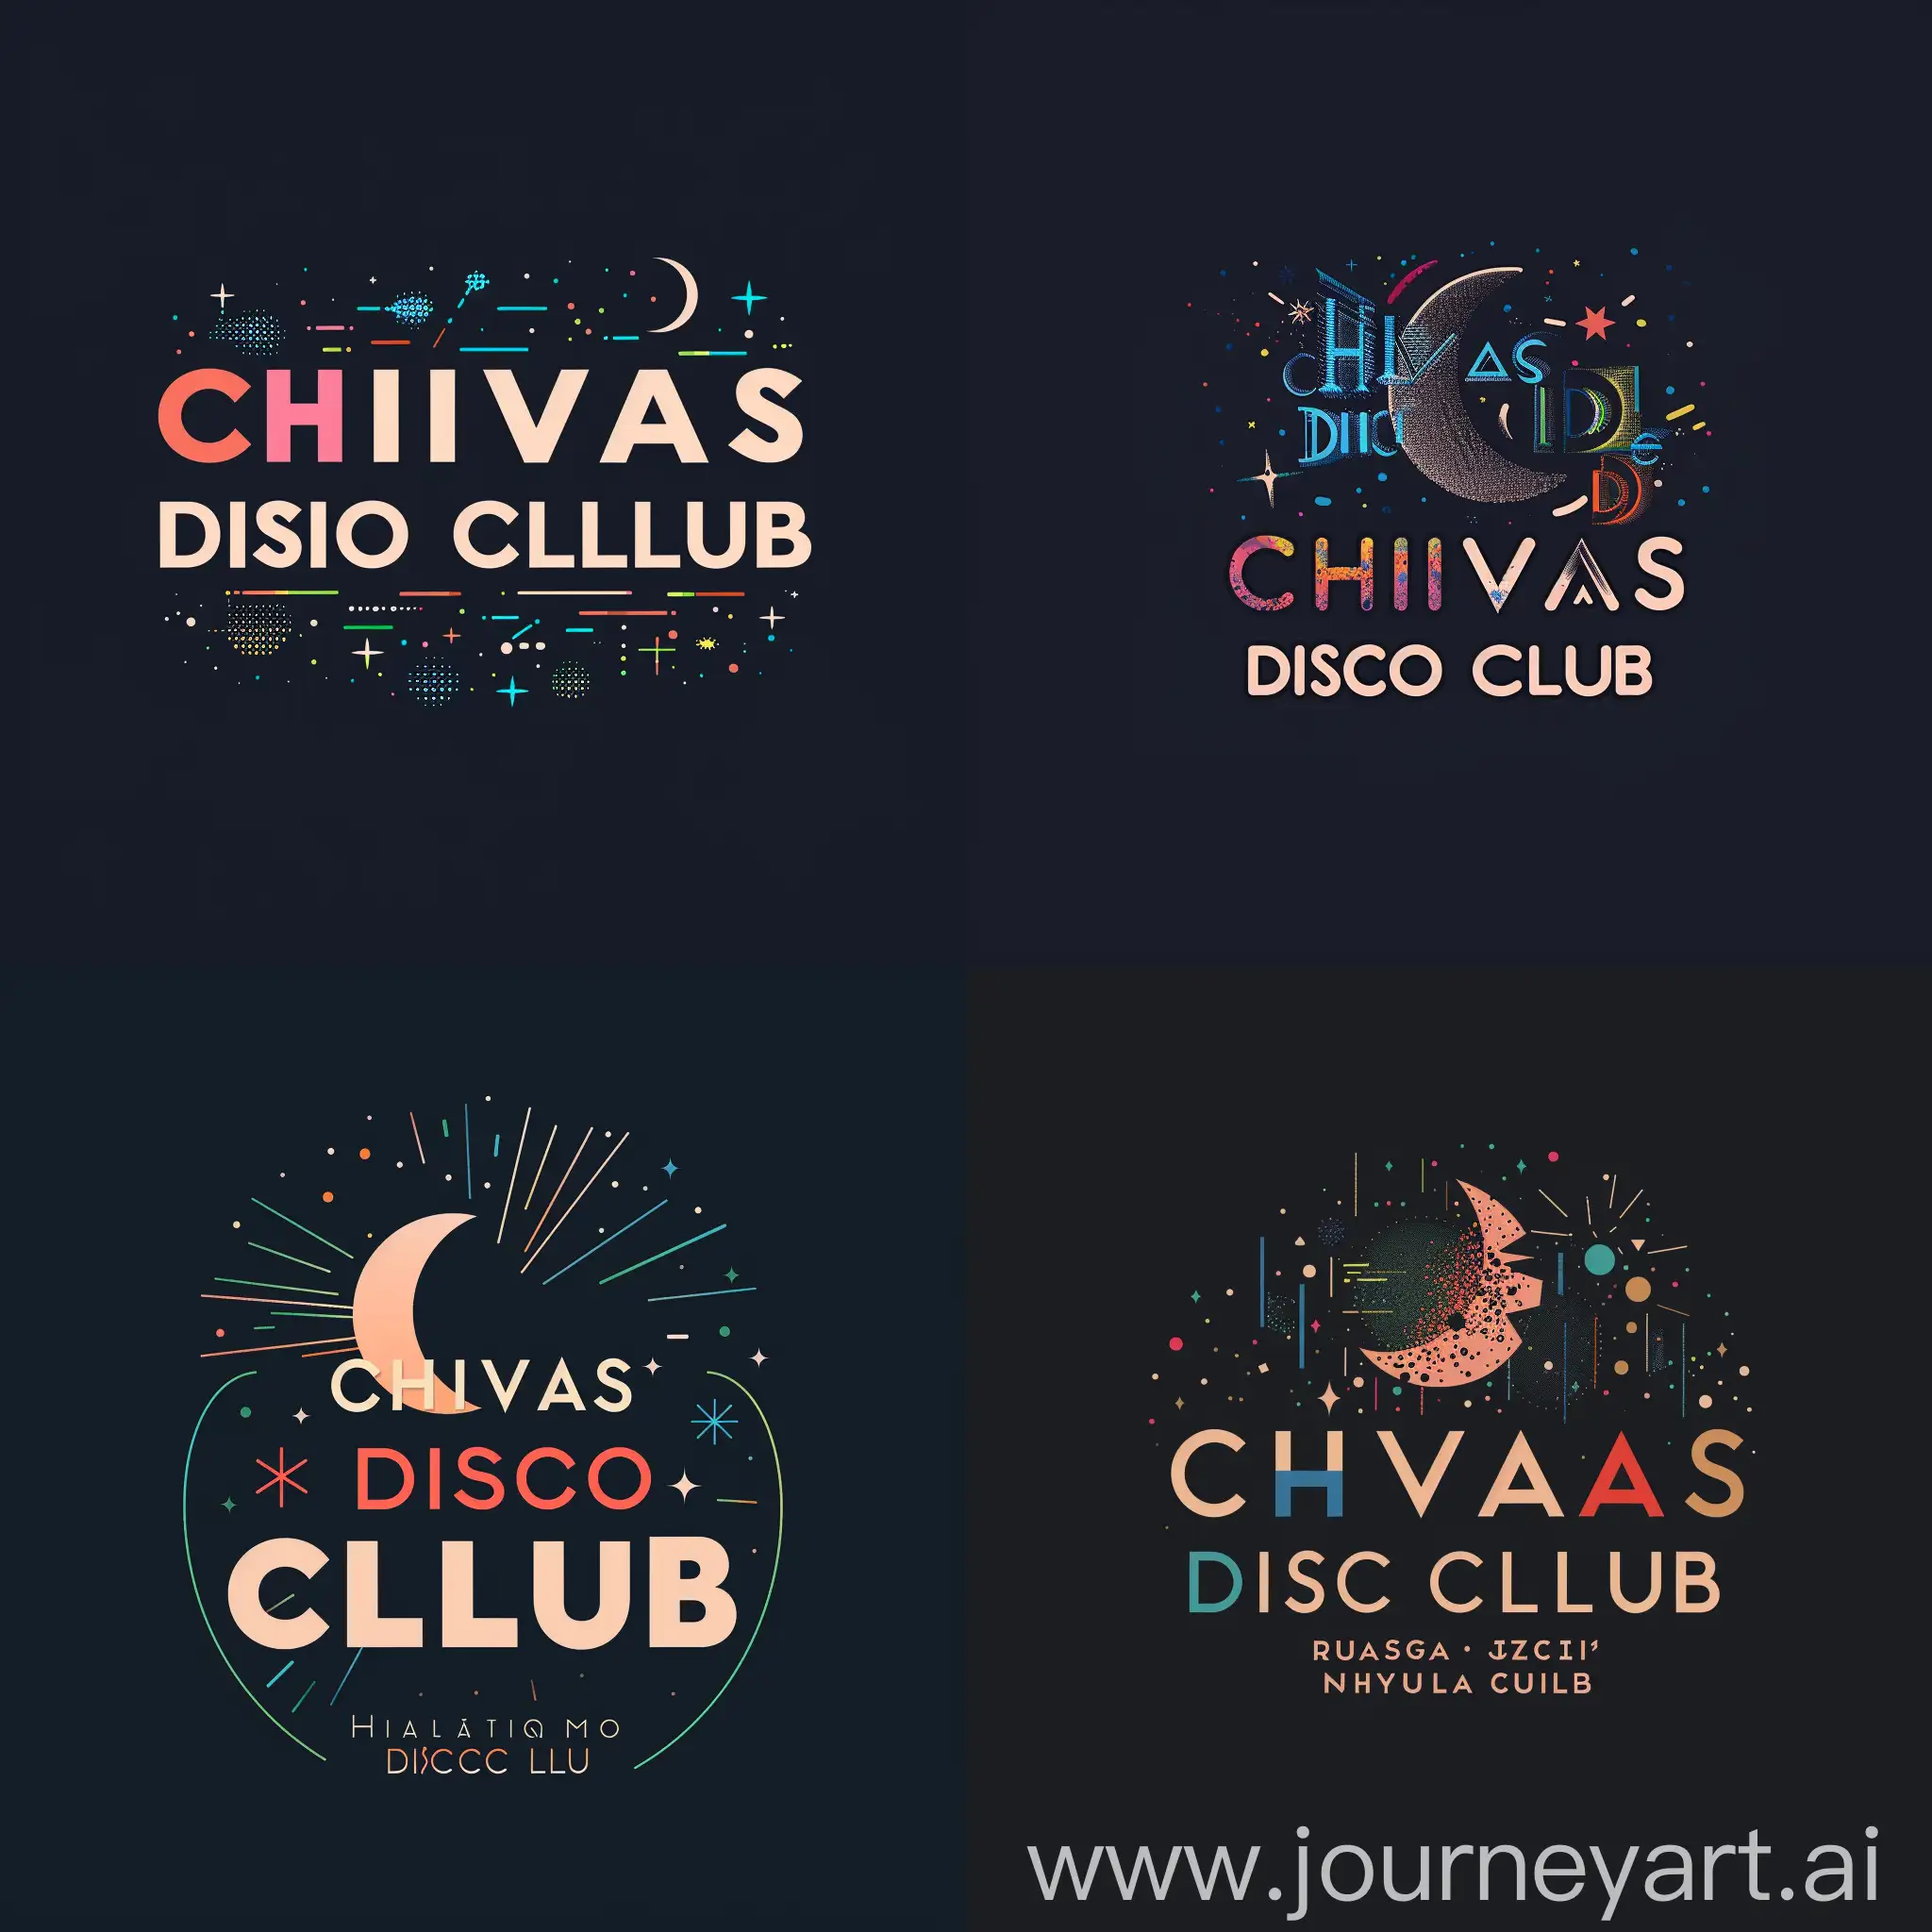 "Create a logo for Chivas Disco Club in Palma de Mallorca. The design should be minimalist, elegant, and evoke a nighttime atmosphere. The primary focus is on the text 'CHIVAS DISCO CLUB', using a sleek and stylized typography that suggests sophistication and movement. A subtle element suggesting nightlife, such as a crescent moon, stars, or neon lights, can be incorporated. The main color should be dark, such as black or navy blue, with pops of color to give a vibrant and attractive look. The design should be versatile and suitable for use on signage, posters, social media, and other promotional materials."






